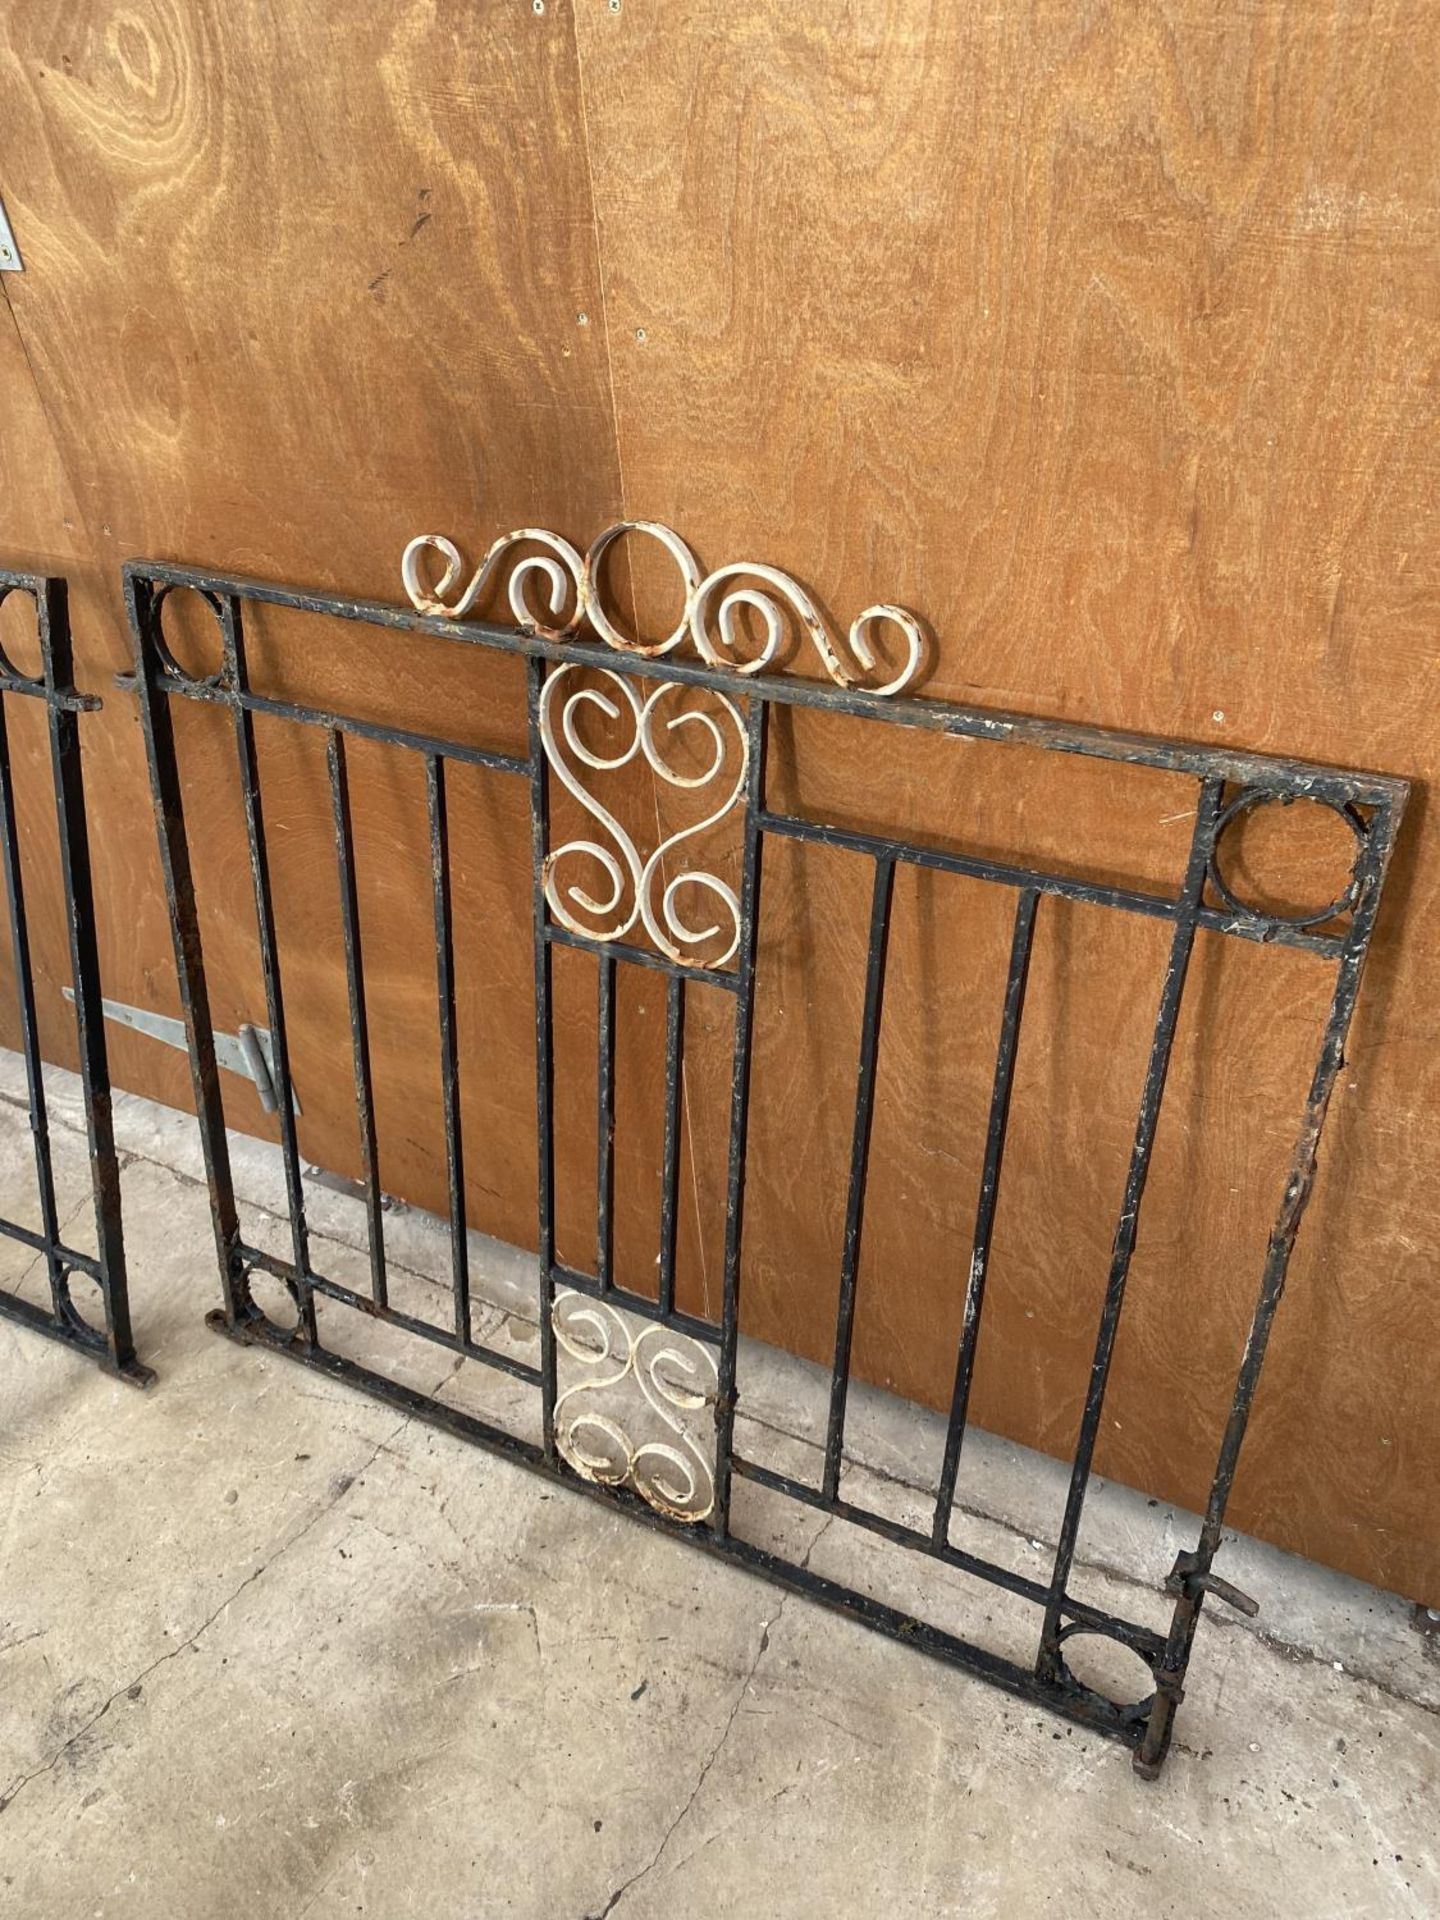 A PAIR OF DECORATIVE WROUGHT IRON GARDEN GATES (L:120CM EACH) - Image 2 of 4